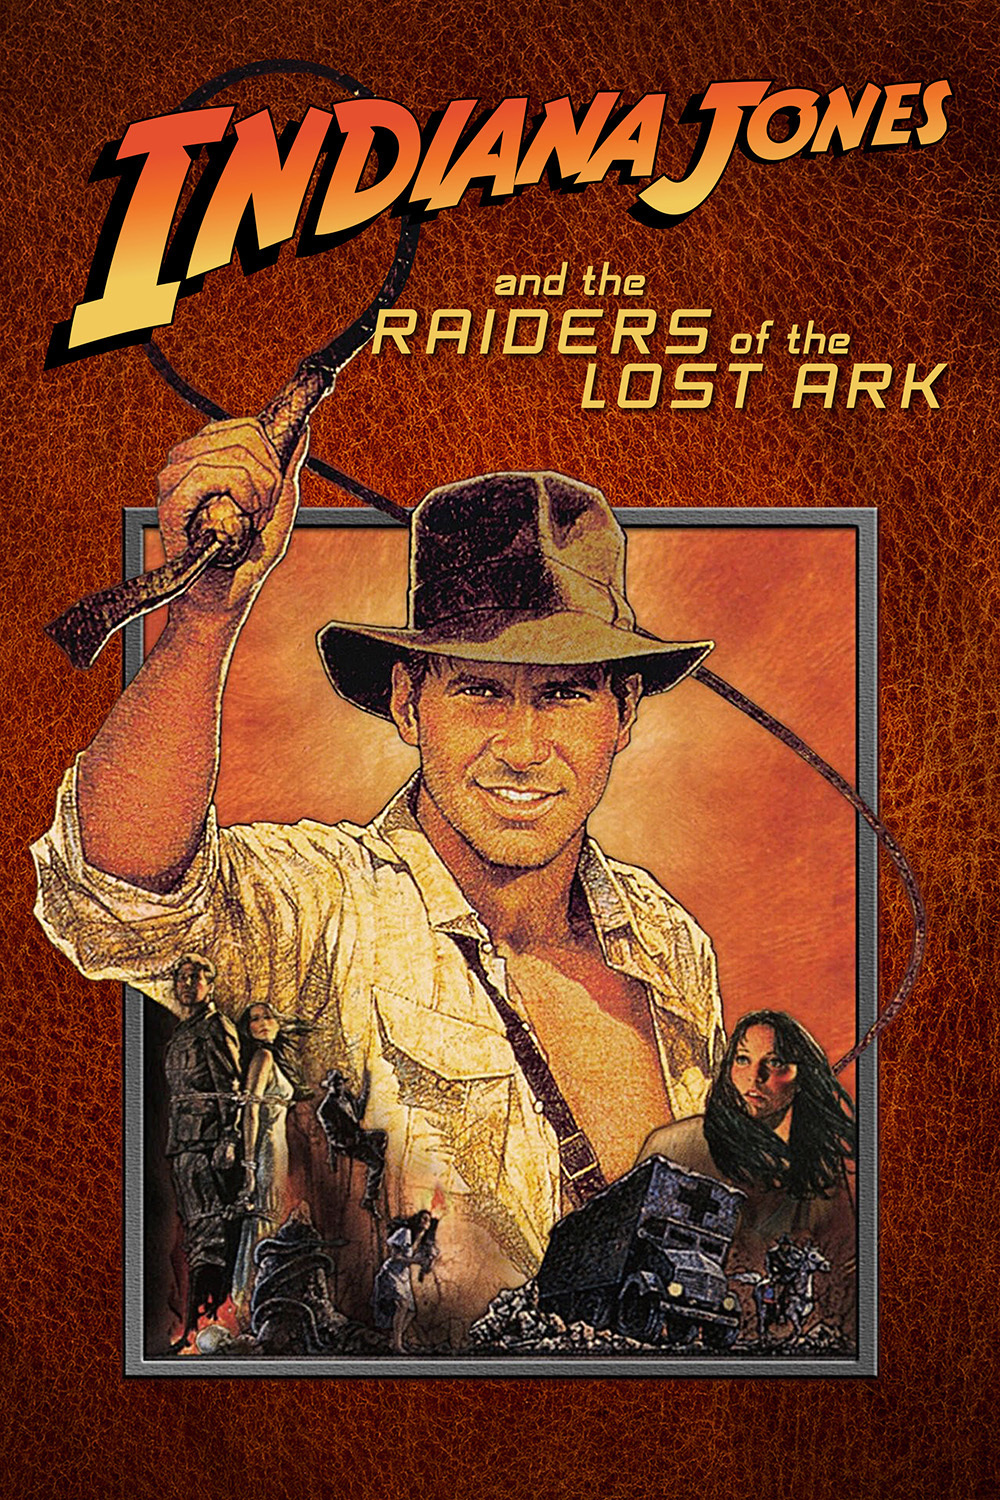 Raiders-of-the-Lost-Arks-Facts-1.jpg